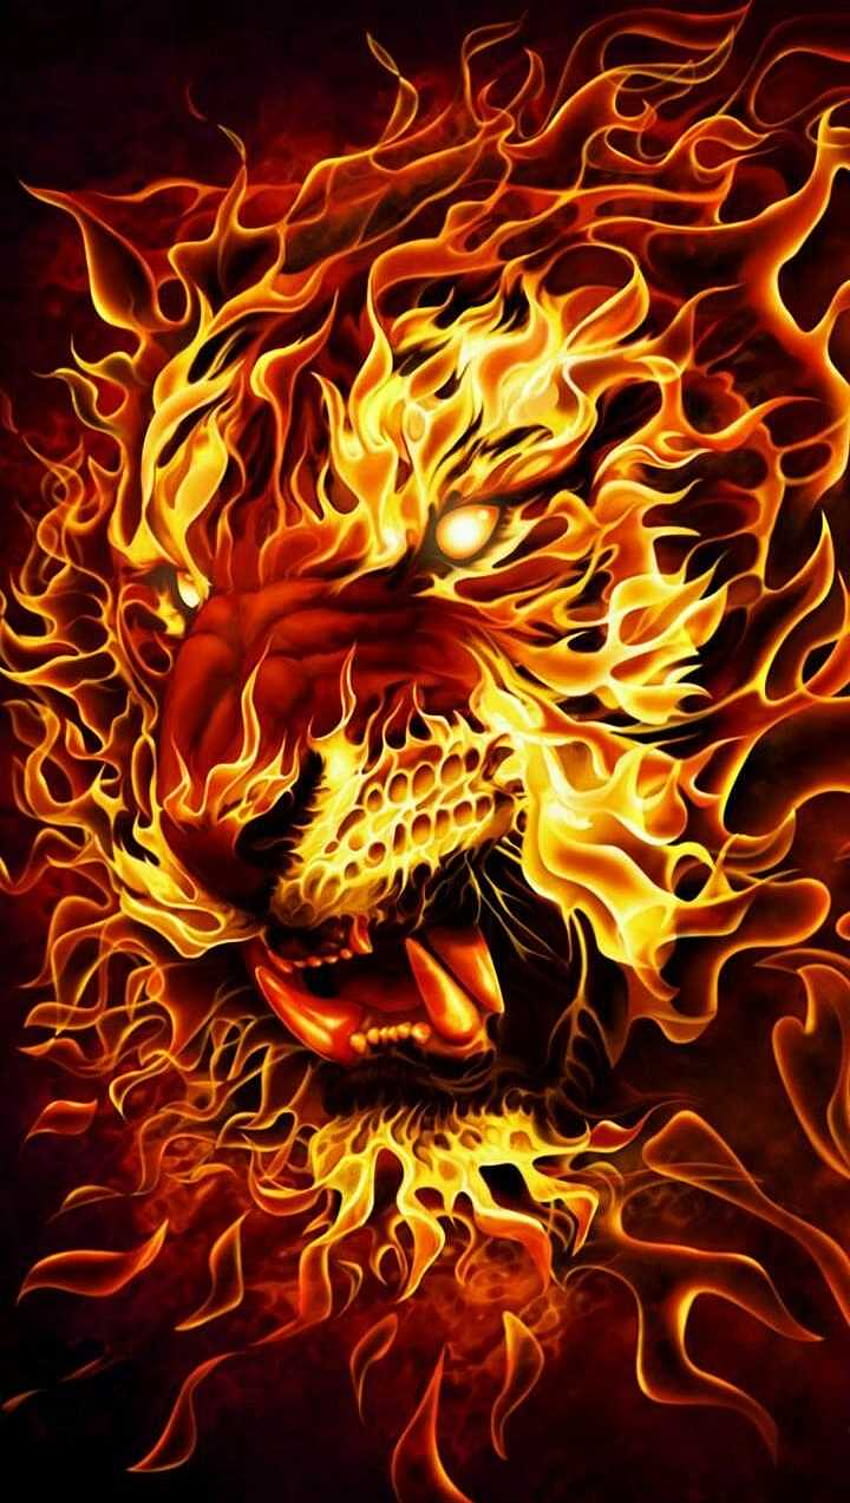 The holy ghost electric show : Fire lion, flaming lion mobile HD phone wallpaper